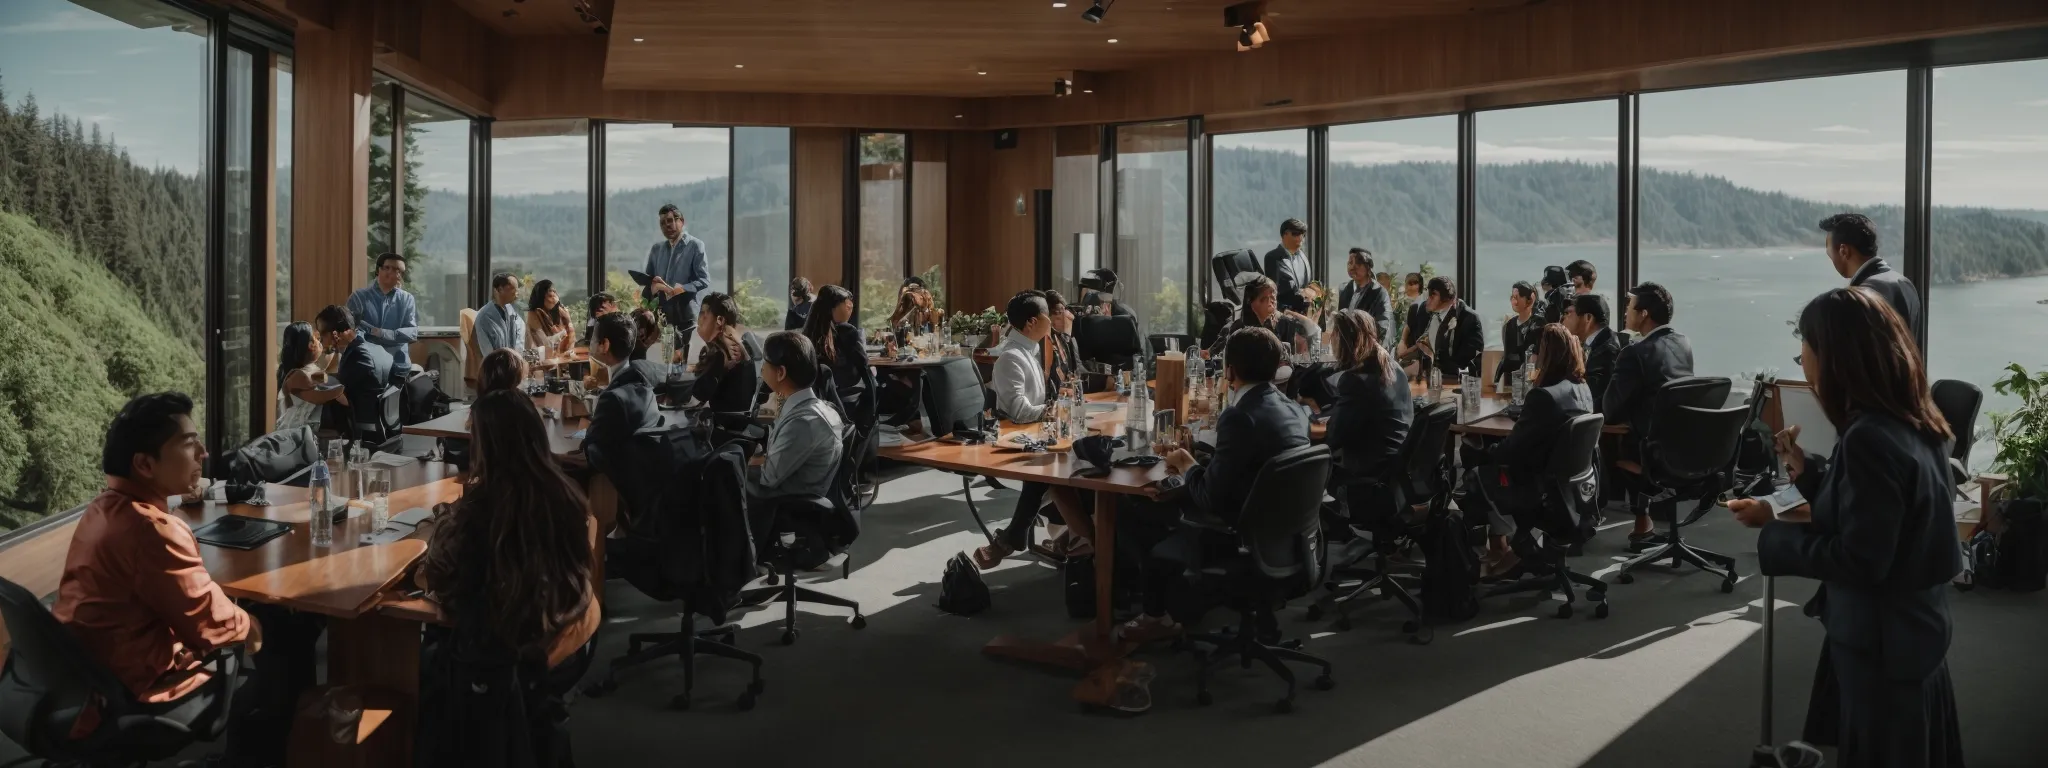 a lively portland workshop with a group of professionals gathered around a conference table, immersed in an seo training session amidst panoramic views of the lush pacific northwest.